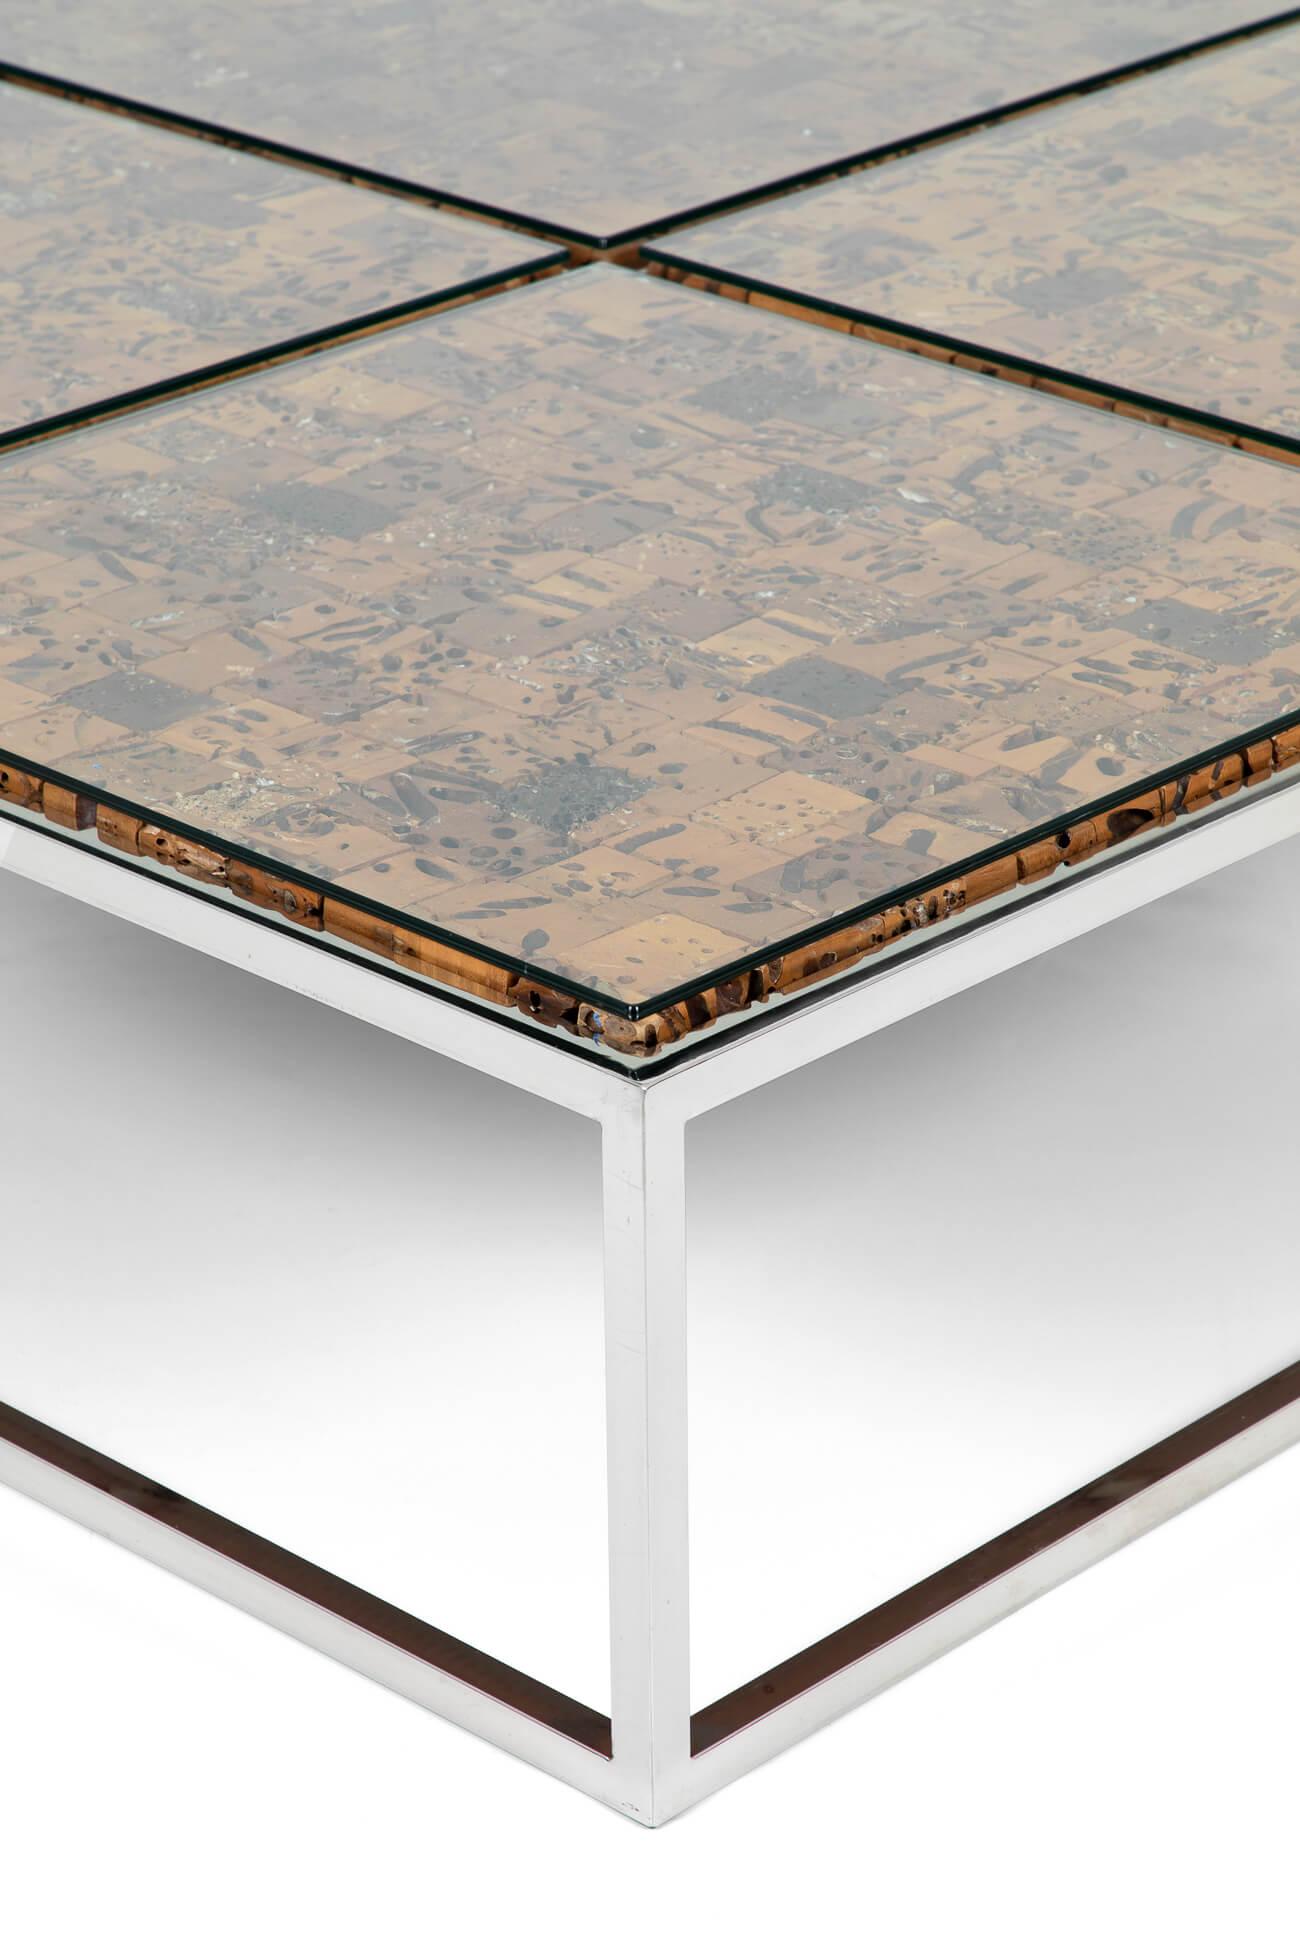 British Chrome and Wooden Cork Designer Coffee Table, 20th Century For Sale